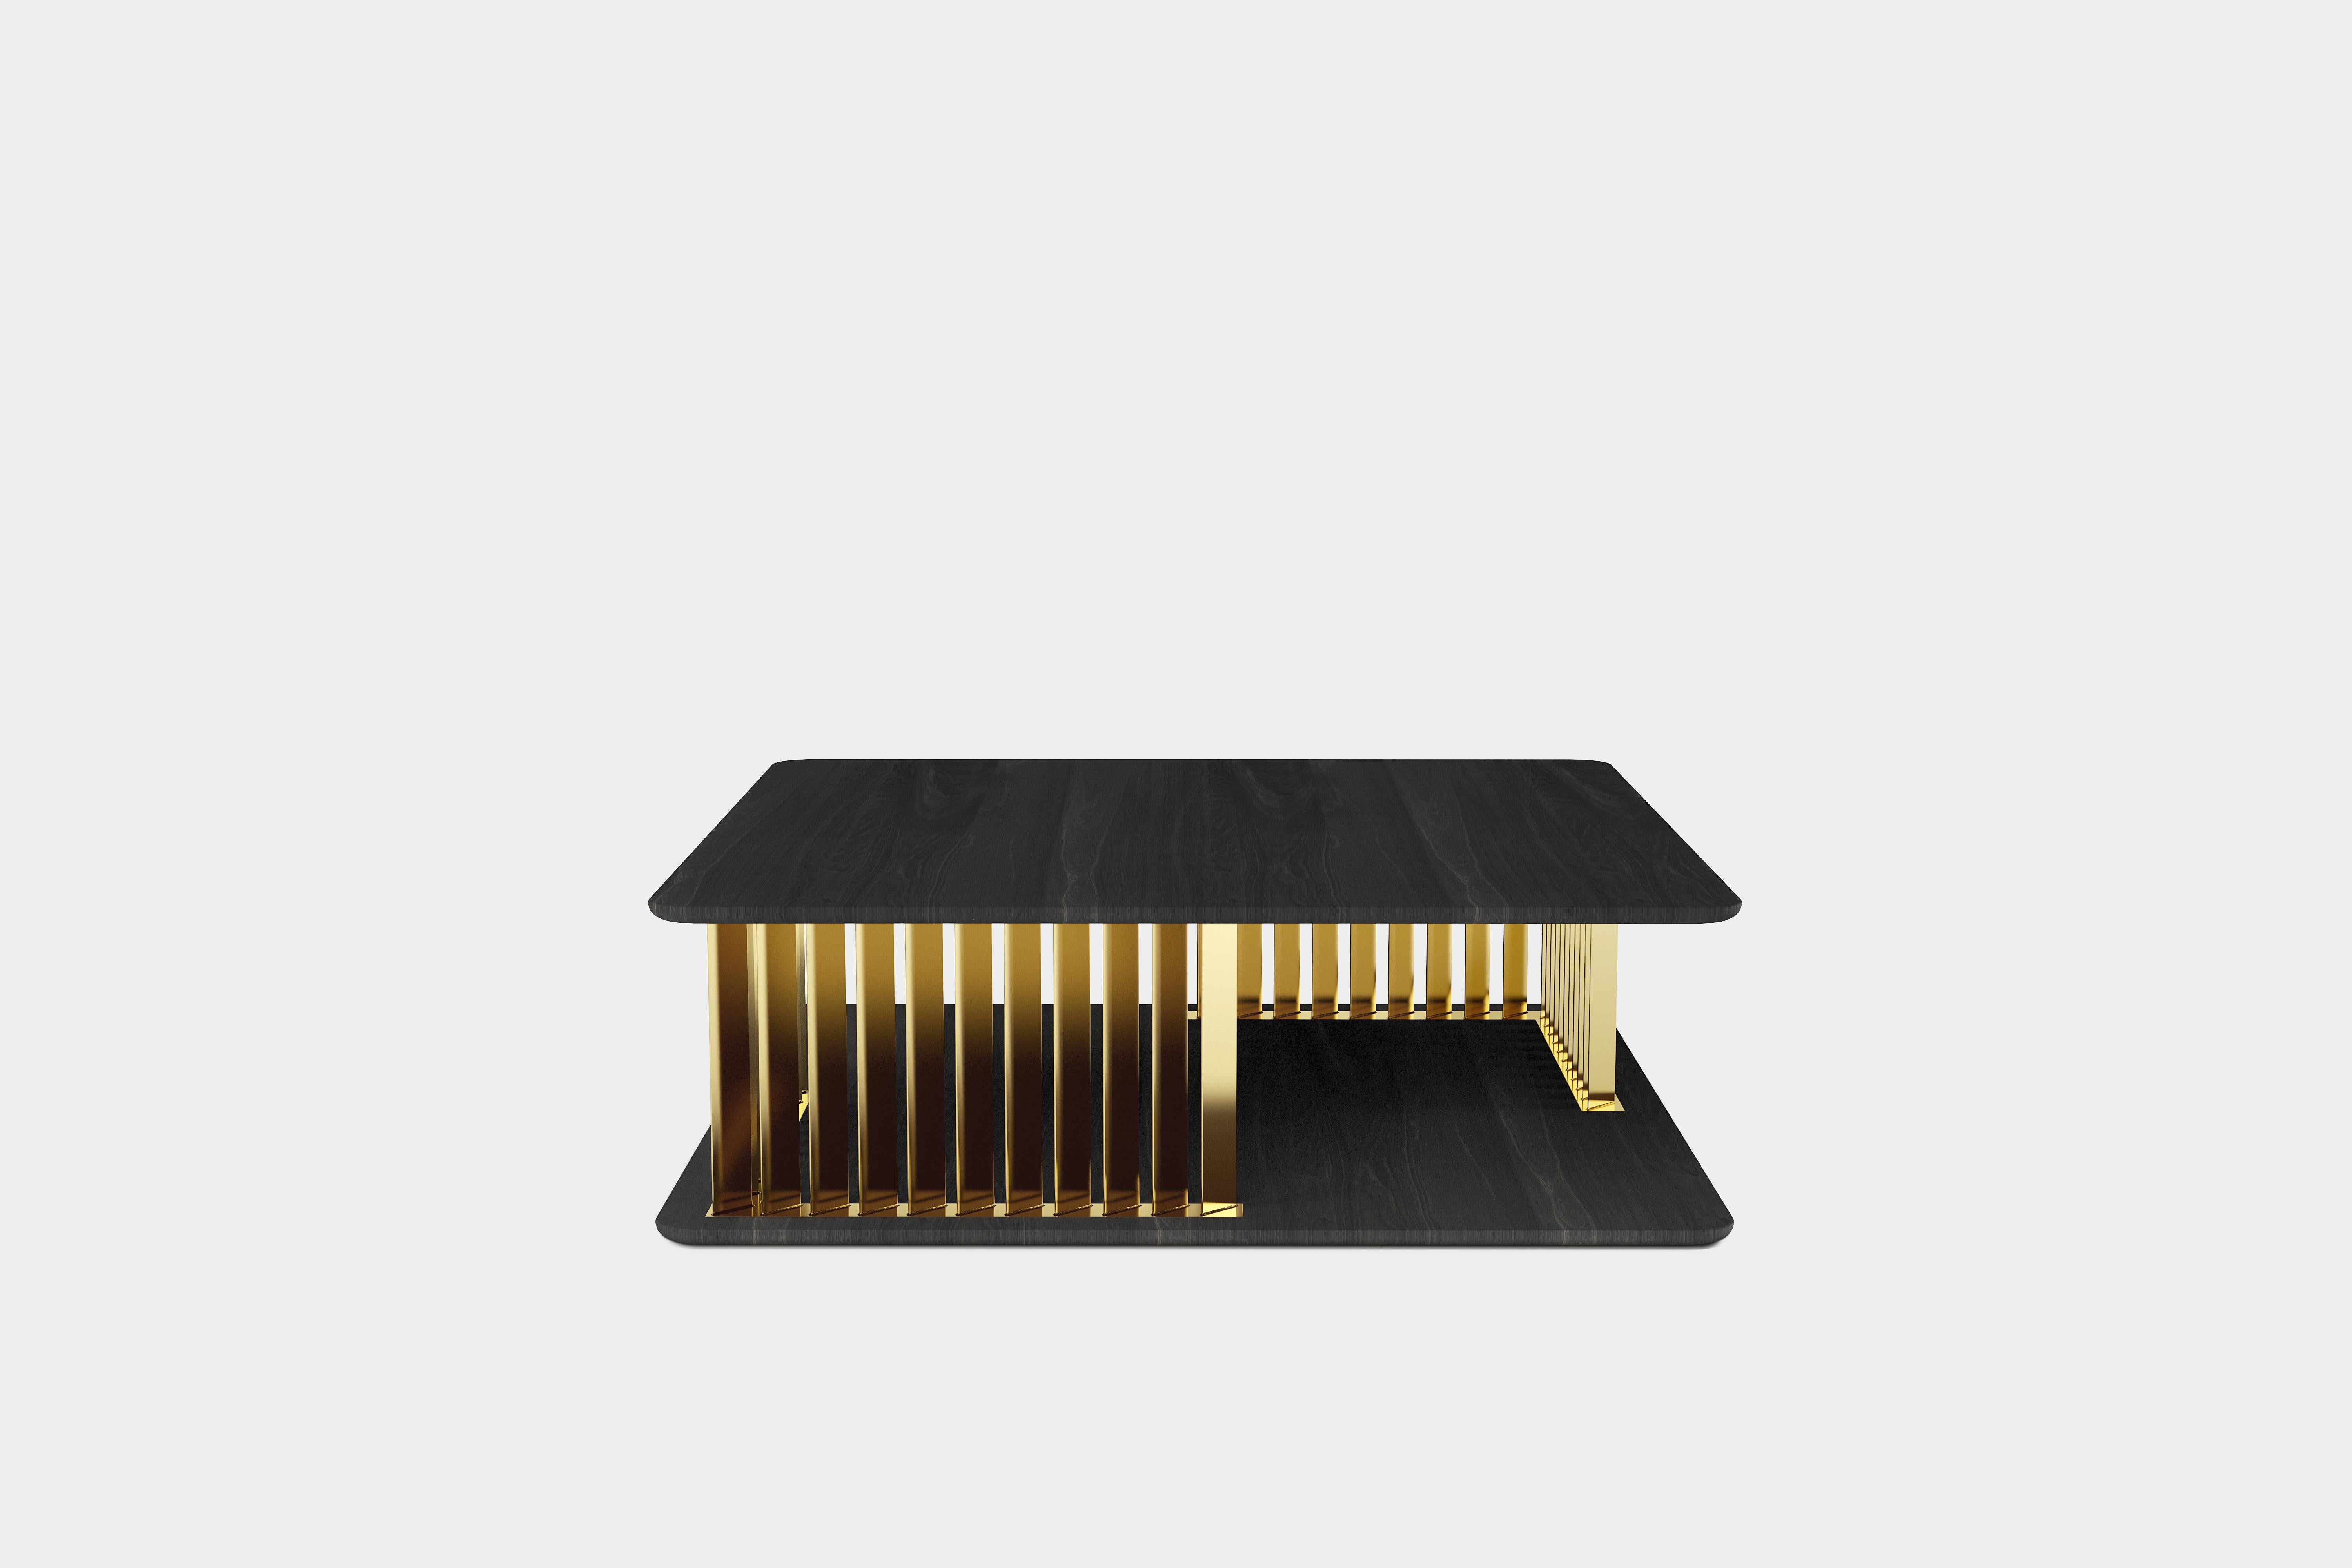 Plateau Square Coffee Table in Black Wood and Brass Structure by NONO

Inspired by the majesty of mountain systems throughout the Americas, Plateau makes reference to the small surfaces that emerge from a vast piece of land peculiar for its